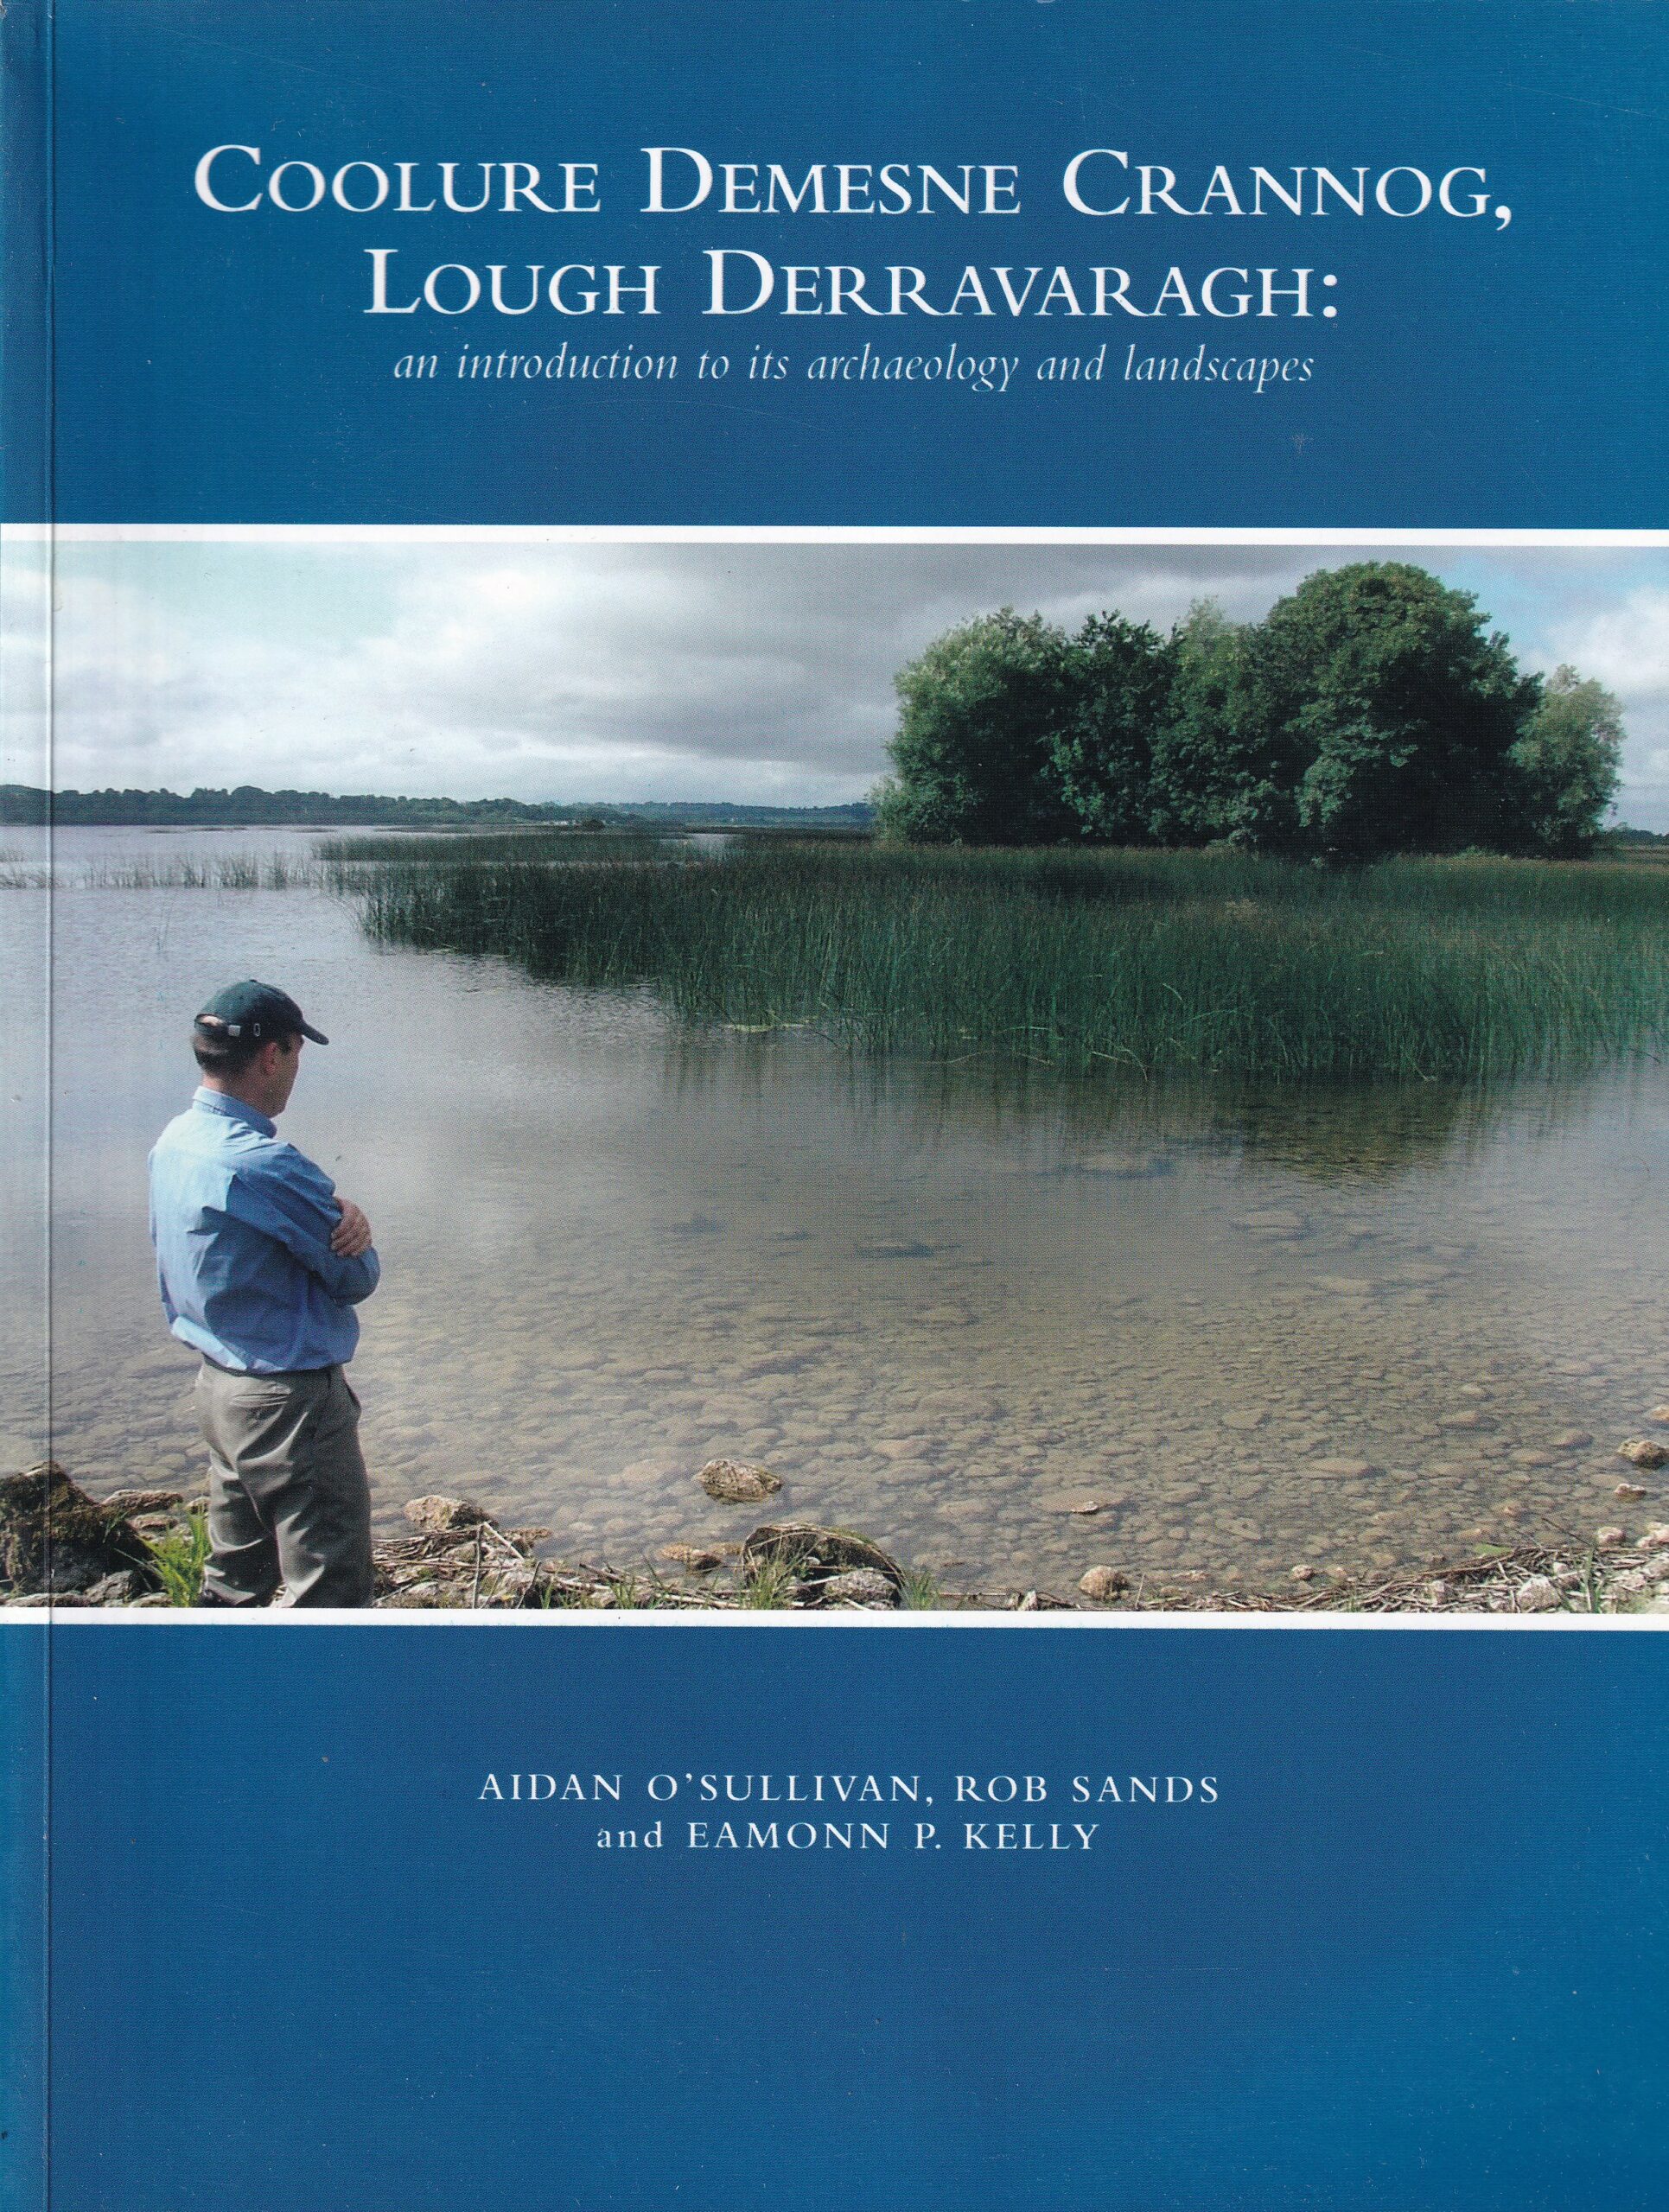 Coolure Demesne Crannog, Lough Derravaragh: An Introduction to its Archaeology and Landscapes by Aidan O'Sullivan, Rob Sands and Eamonn P. Kelly